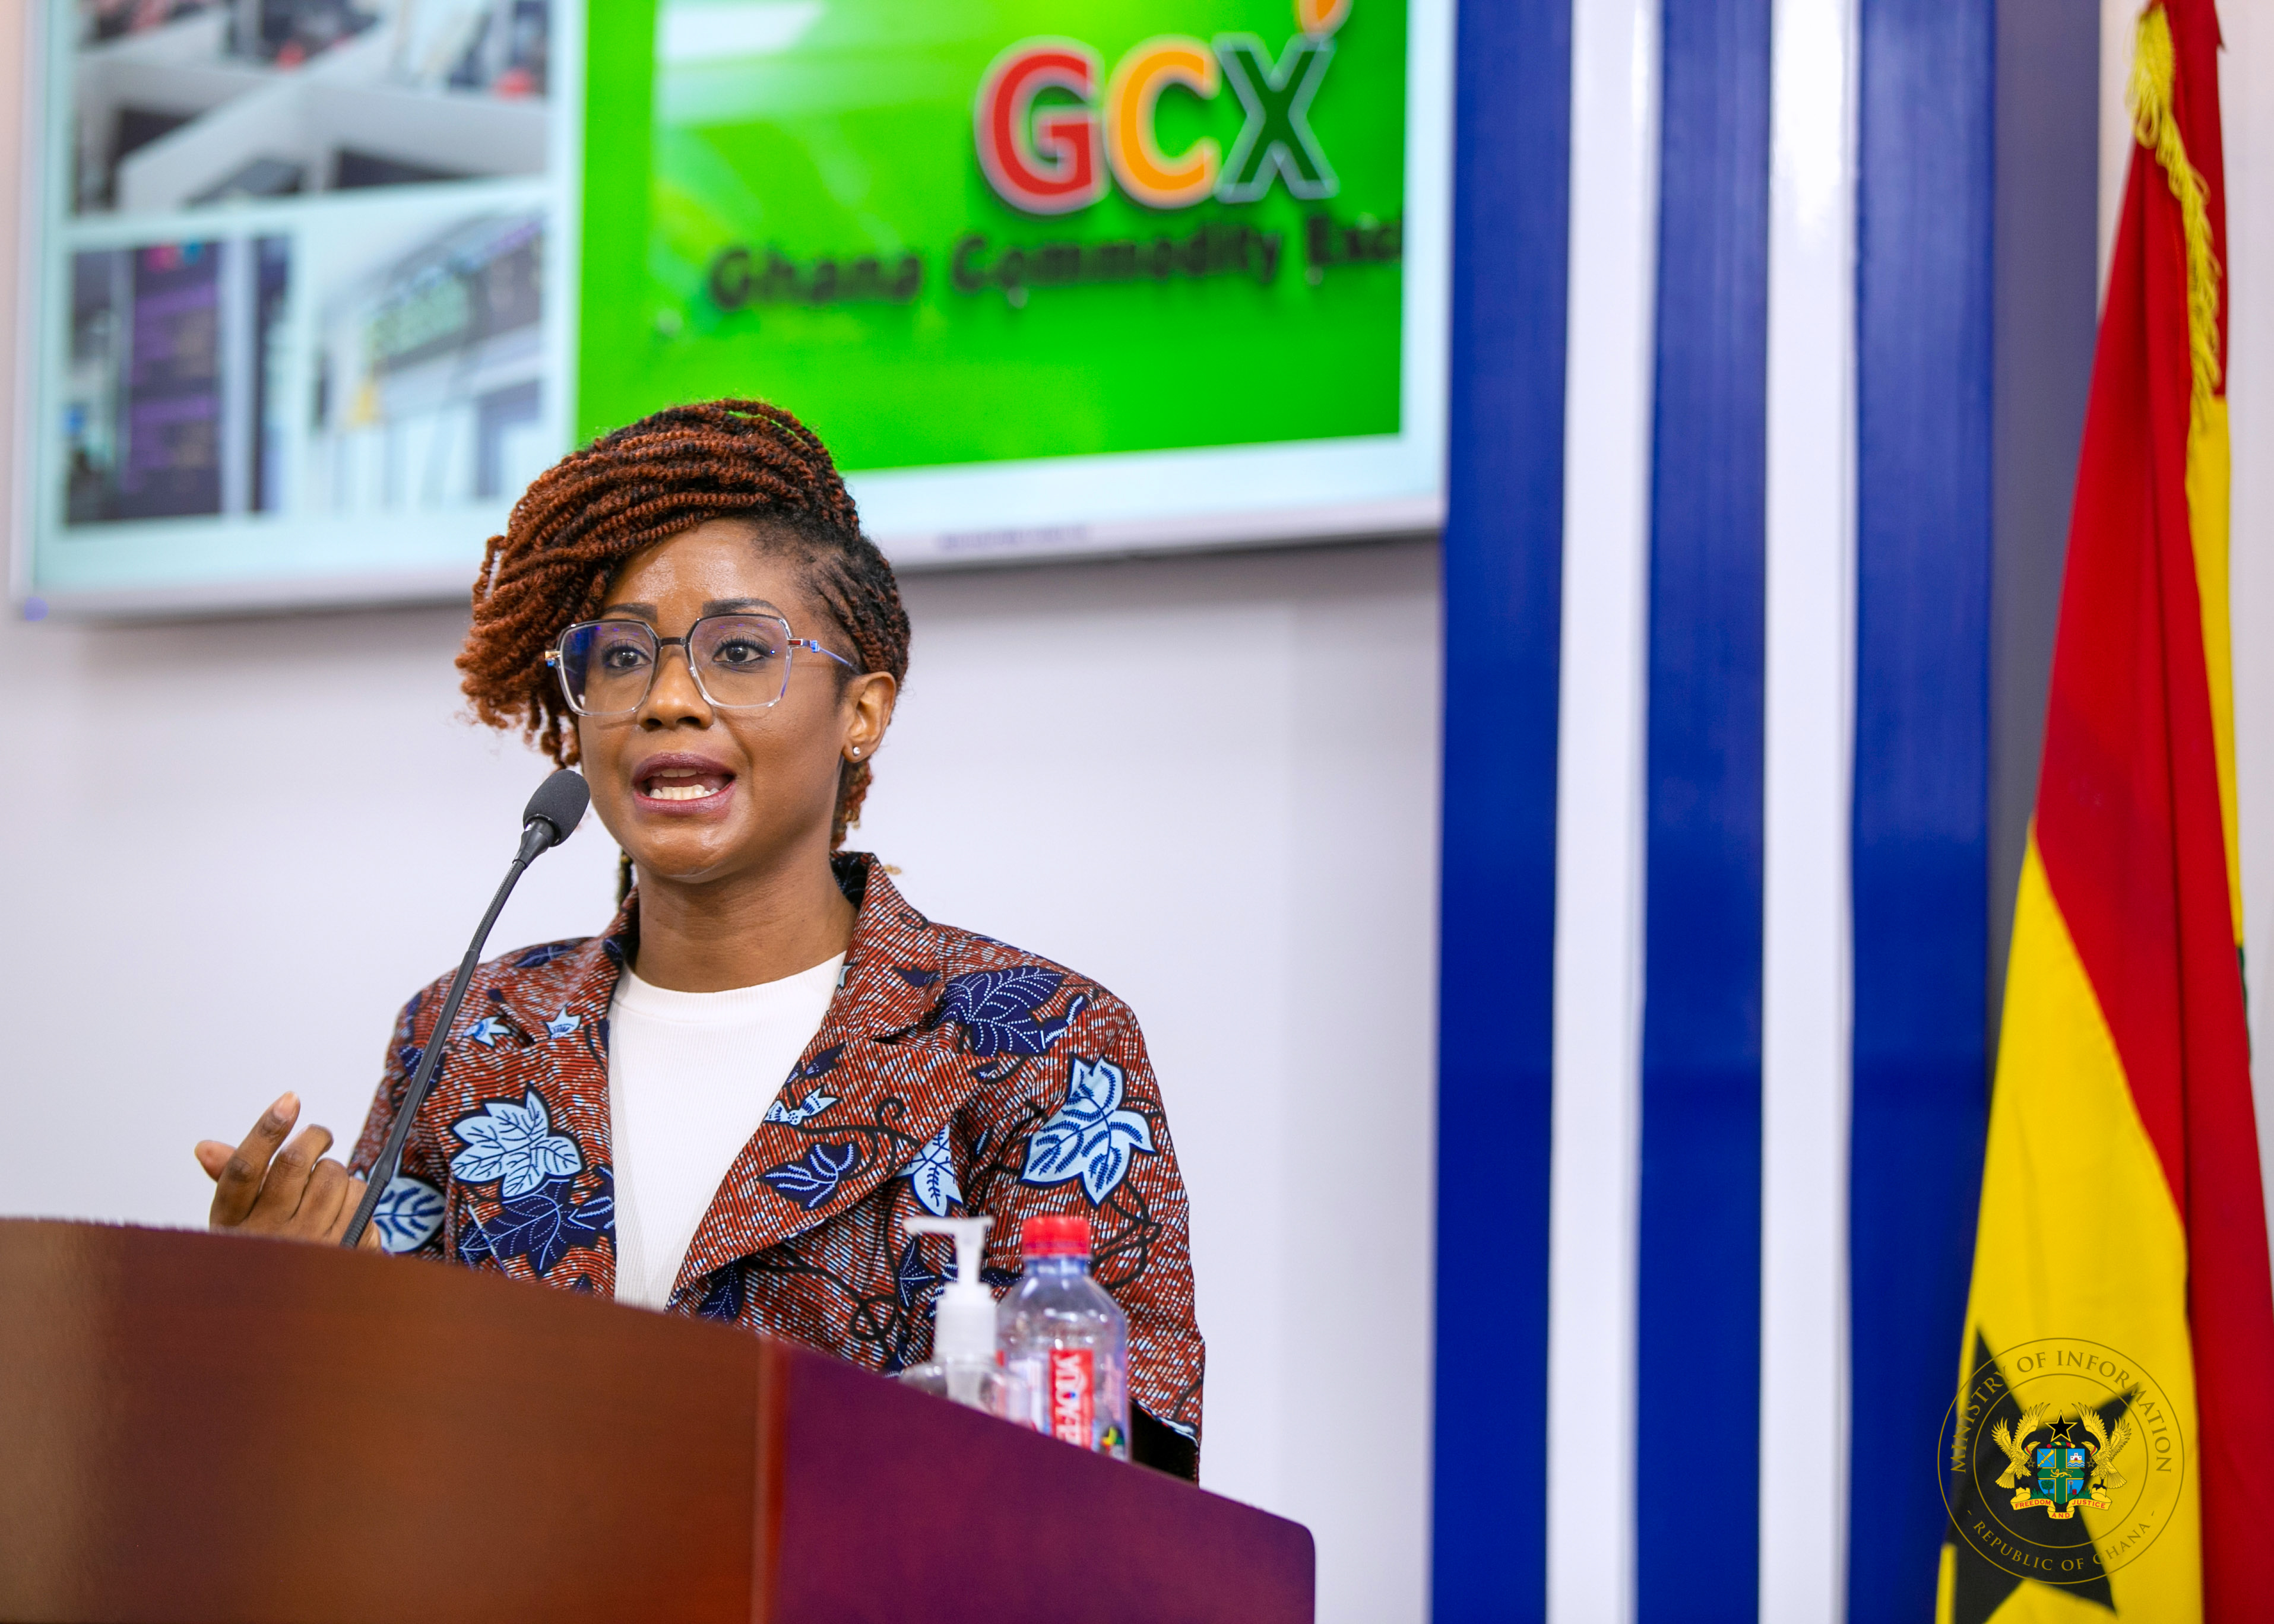 Mrs Tucci Goka Ivowi, Chief Executive Officer of the Ghana Commodity Exchange, addressing the press. Picture: GABRIEL AHIABOR